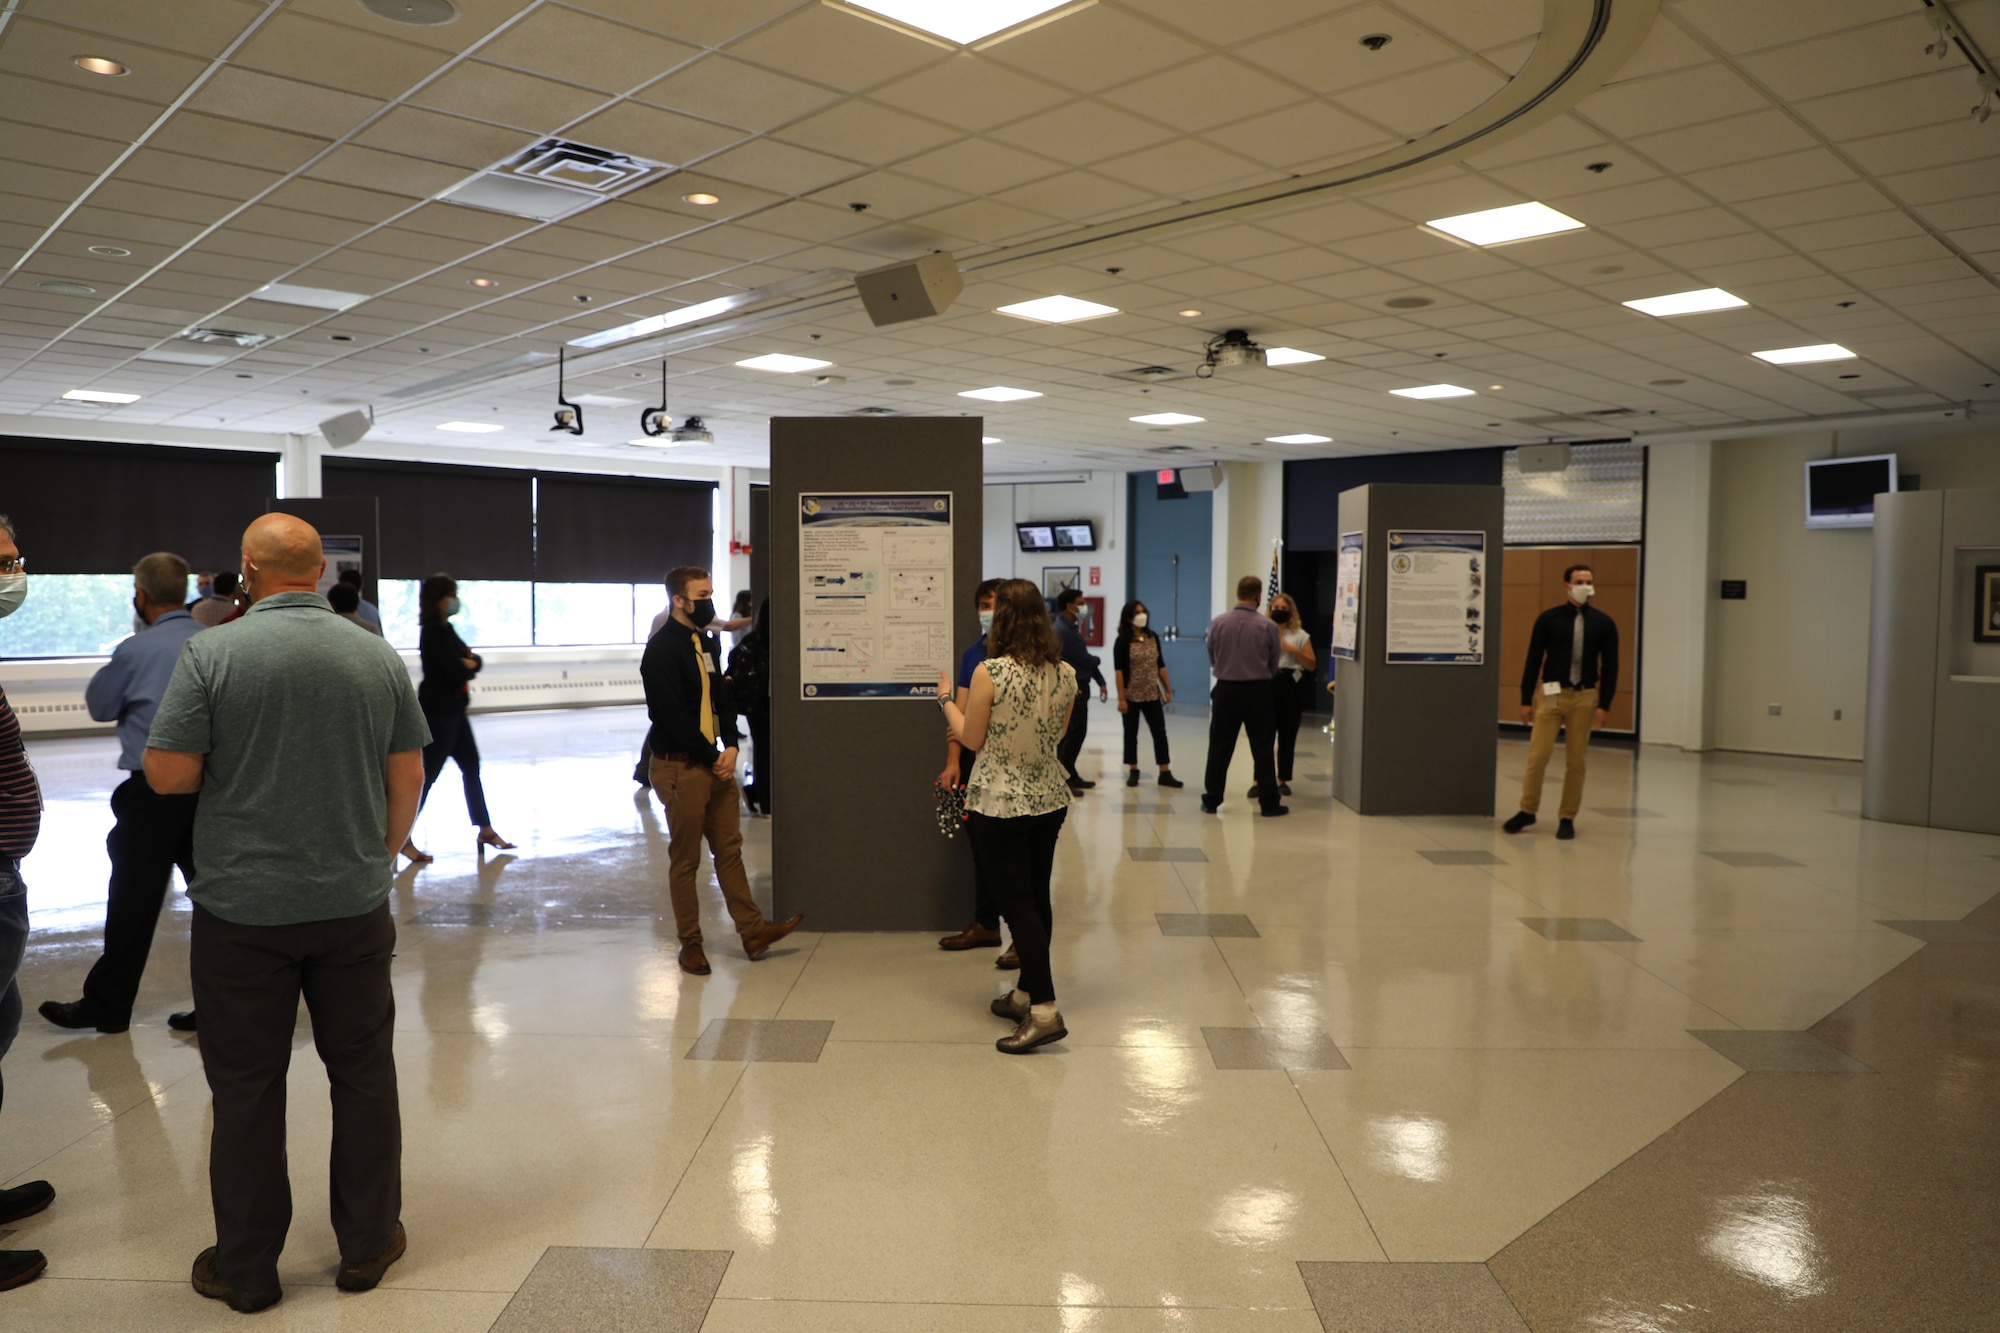 The in-person poster sessions meant masks and social distancing because of COVID-19. (U.S. Air Force photo/Micah Hung)